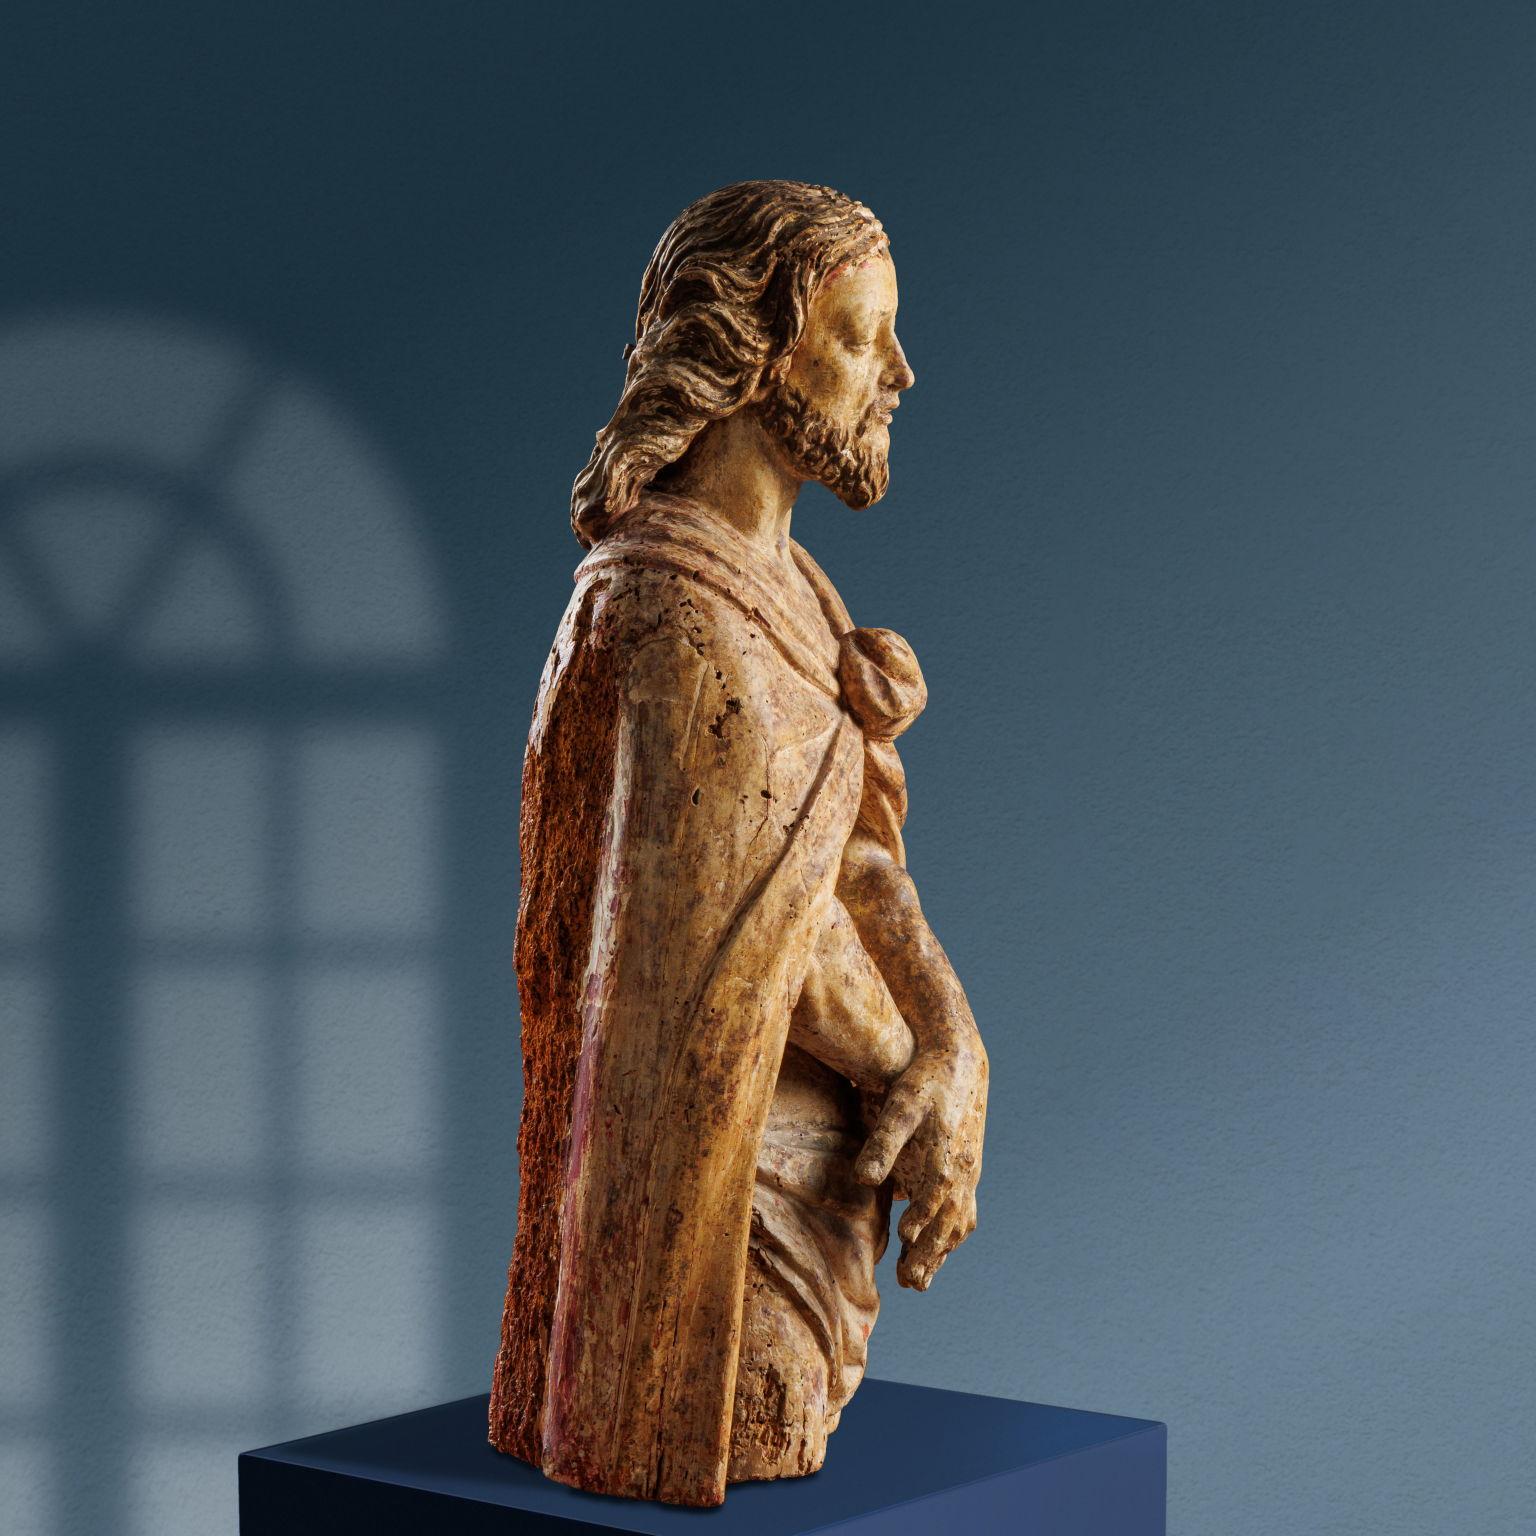 Wooden sculpture depicting Ecce Homo. Christ, whose figure is cut off at thigh level, is standing, arms crossed at waist level. Long ringlets frame a face with a pointed beard, a half-open mouth, and a low stare in an attitude of resignation. He